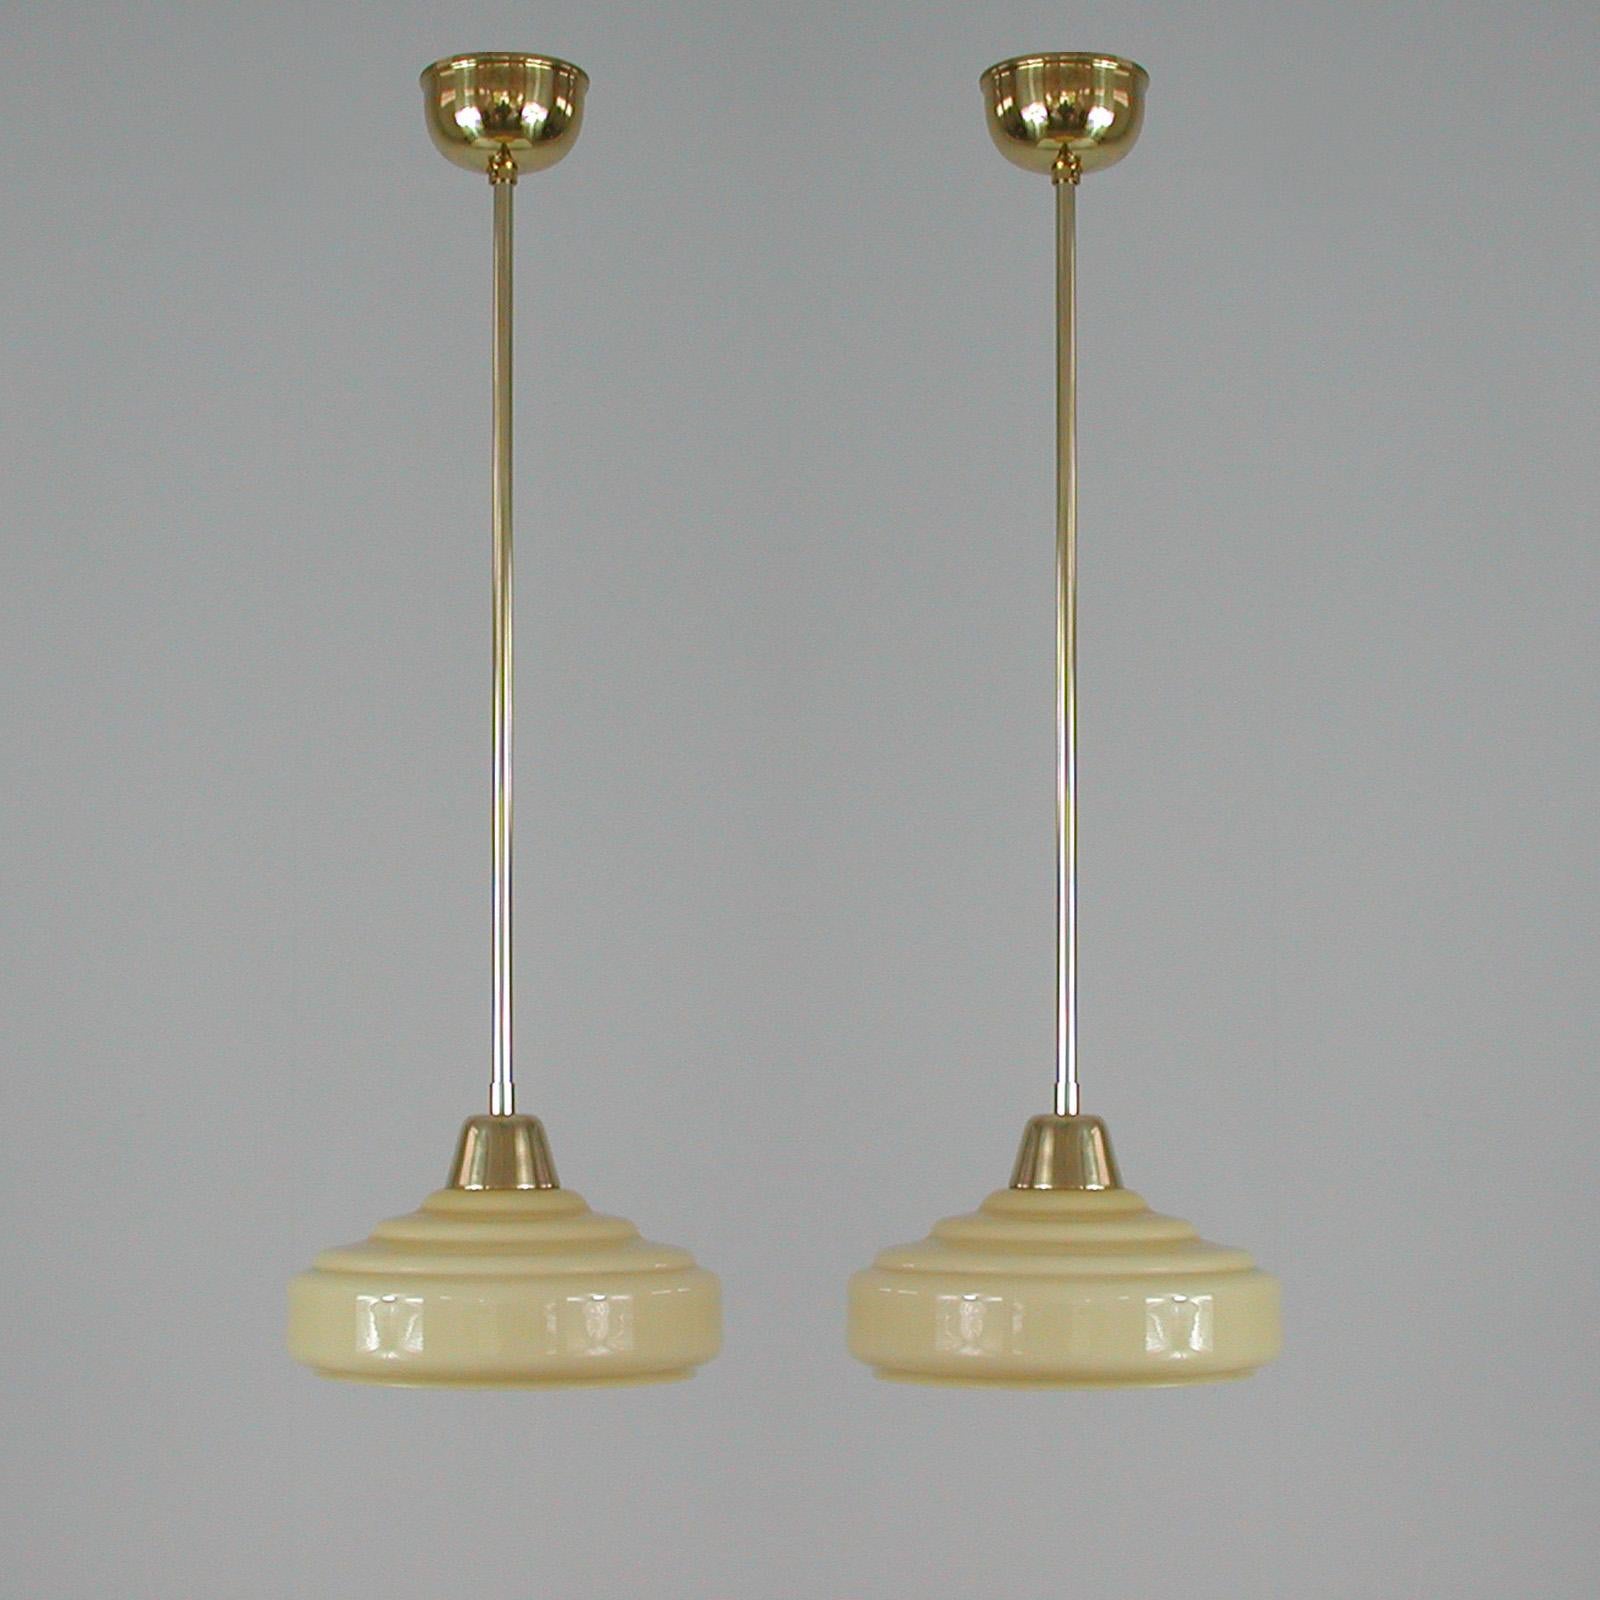 These elegant pendants were designed and made in France in the 1930s-1940s. The lamps are made of brass and have got cream colored glass shade. Good vintage condition with one E14 socket.

The lamps have been rewired and re-electrified for use in